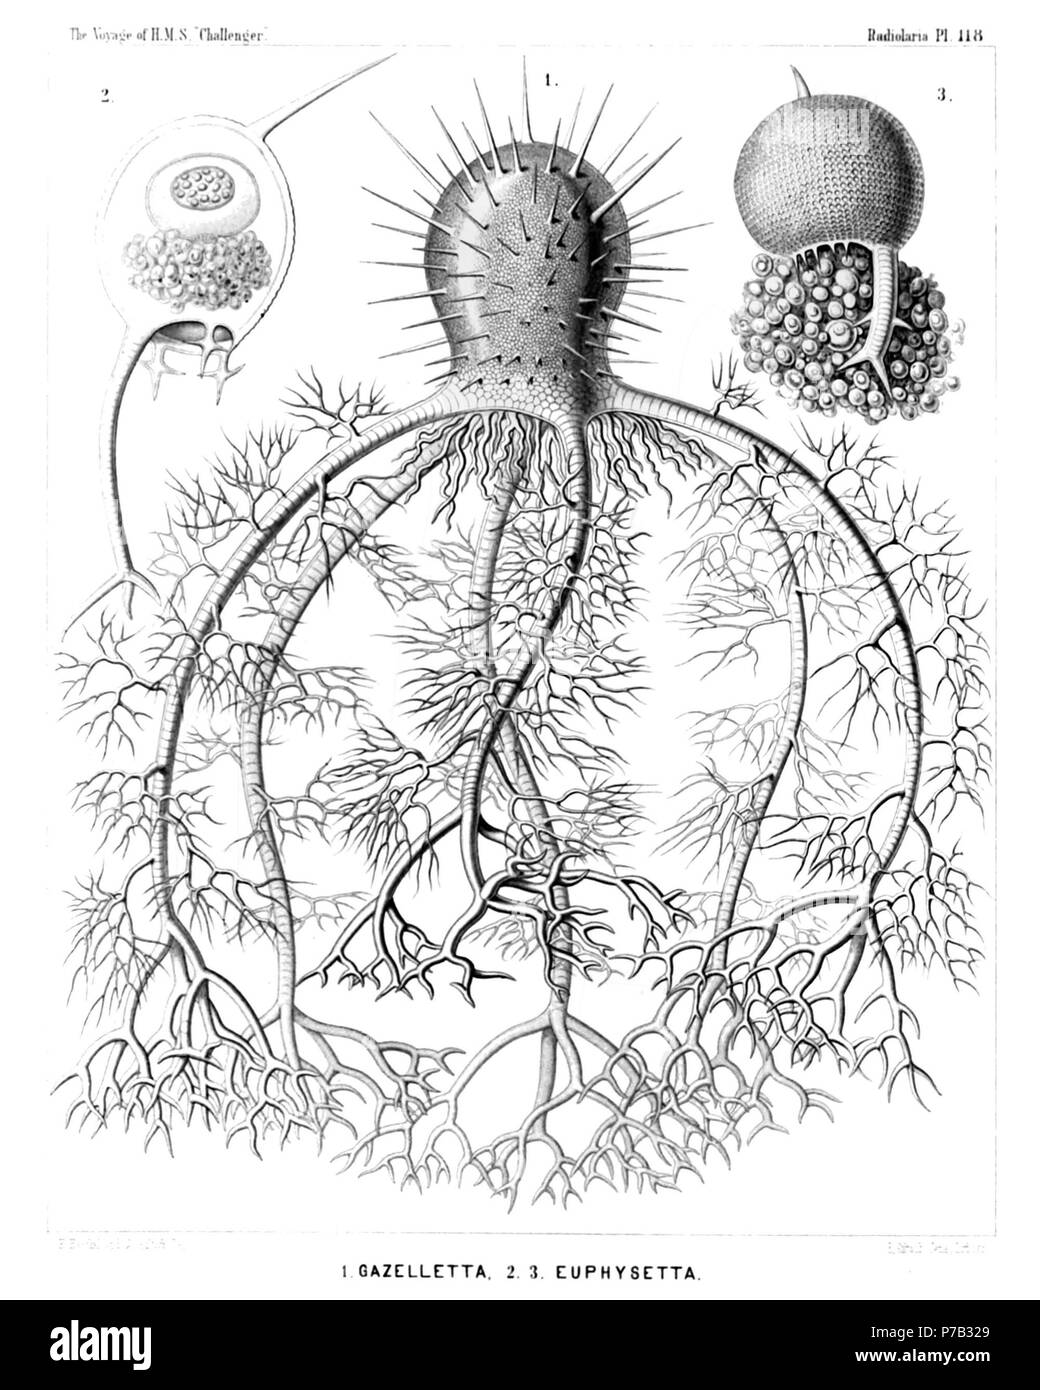 English: Illustration from Report on the Radiolaria collected by H.M.S. Challenger during the years 1873-1876. Part III. Original description follows:  Plate 118. Medusettida.  Diam.  Fig. 1. Gazelletta melusina, n. sp., × 300  From the peristome of the thorny campanulate shell arise six large descending feet, which are studded with arborescent fragile lateral branches, and armed at the distal end with stouter dichotomous terminal branches.  Fig. 2. Euphysetta staurocodon, n. sp., × 300  The peristome of the ovate shell bears an odd large foot with three terminal branches and three cruciate ru Stock Photo